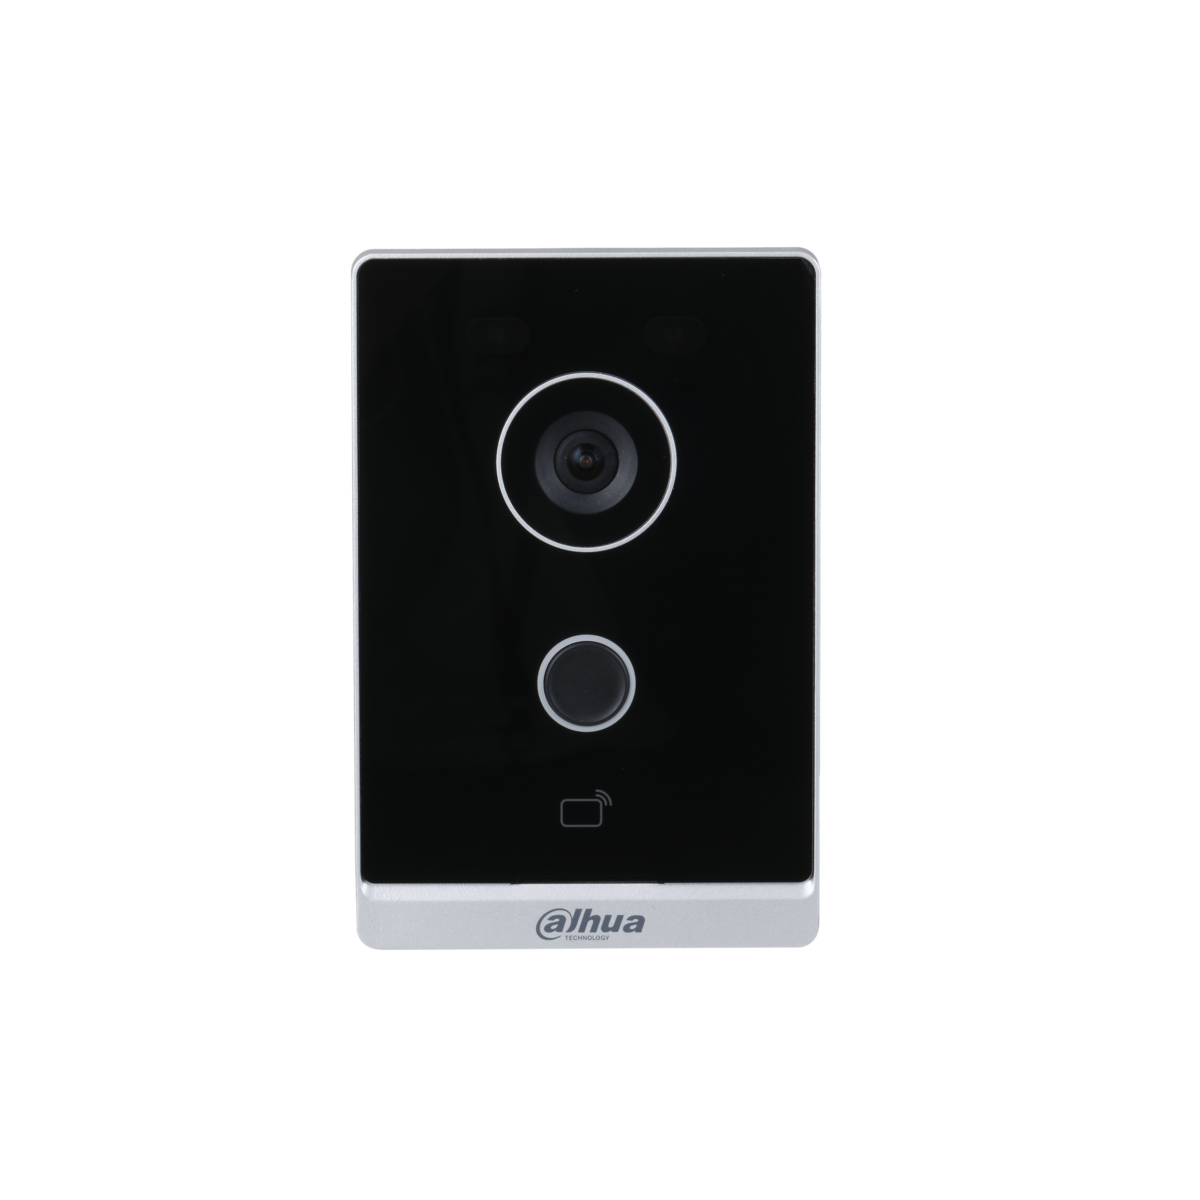 DAHUA SIP2.0 IP INTERCOM 1 BUTTON AUDIO/VIDEO DOOR STATION BLACK WITH SILVER RESIDENTIAL MECHANICAL BUTTON 2MP 142° PLASTIC 12VDC/48V POE SWITCH